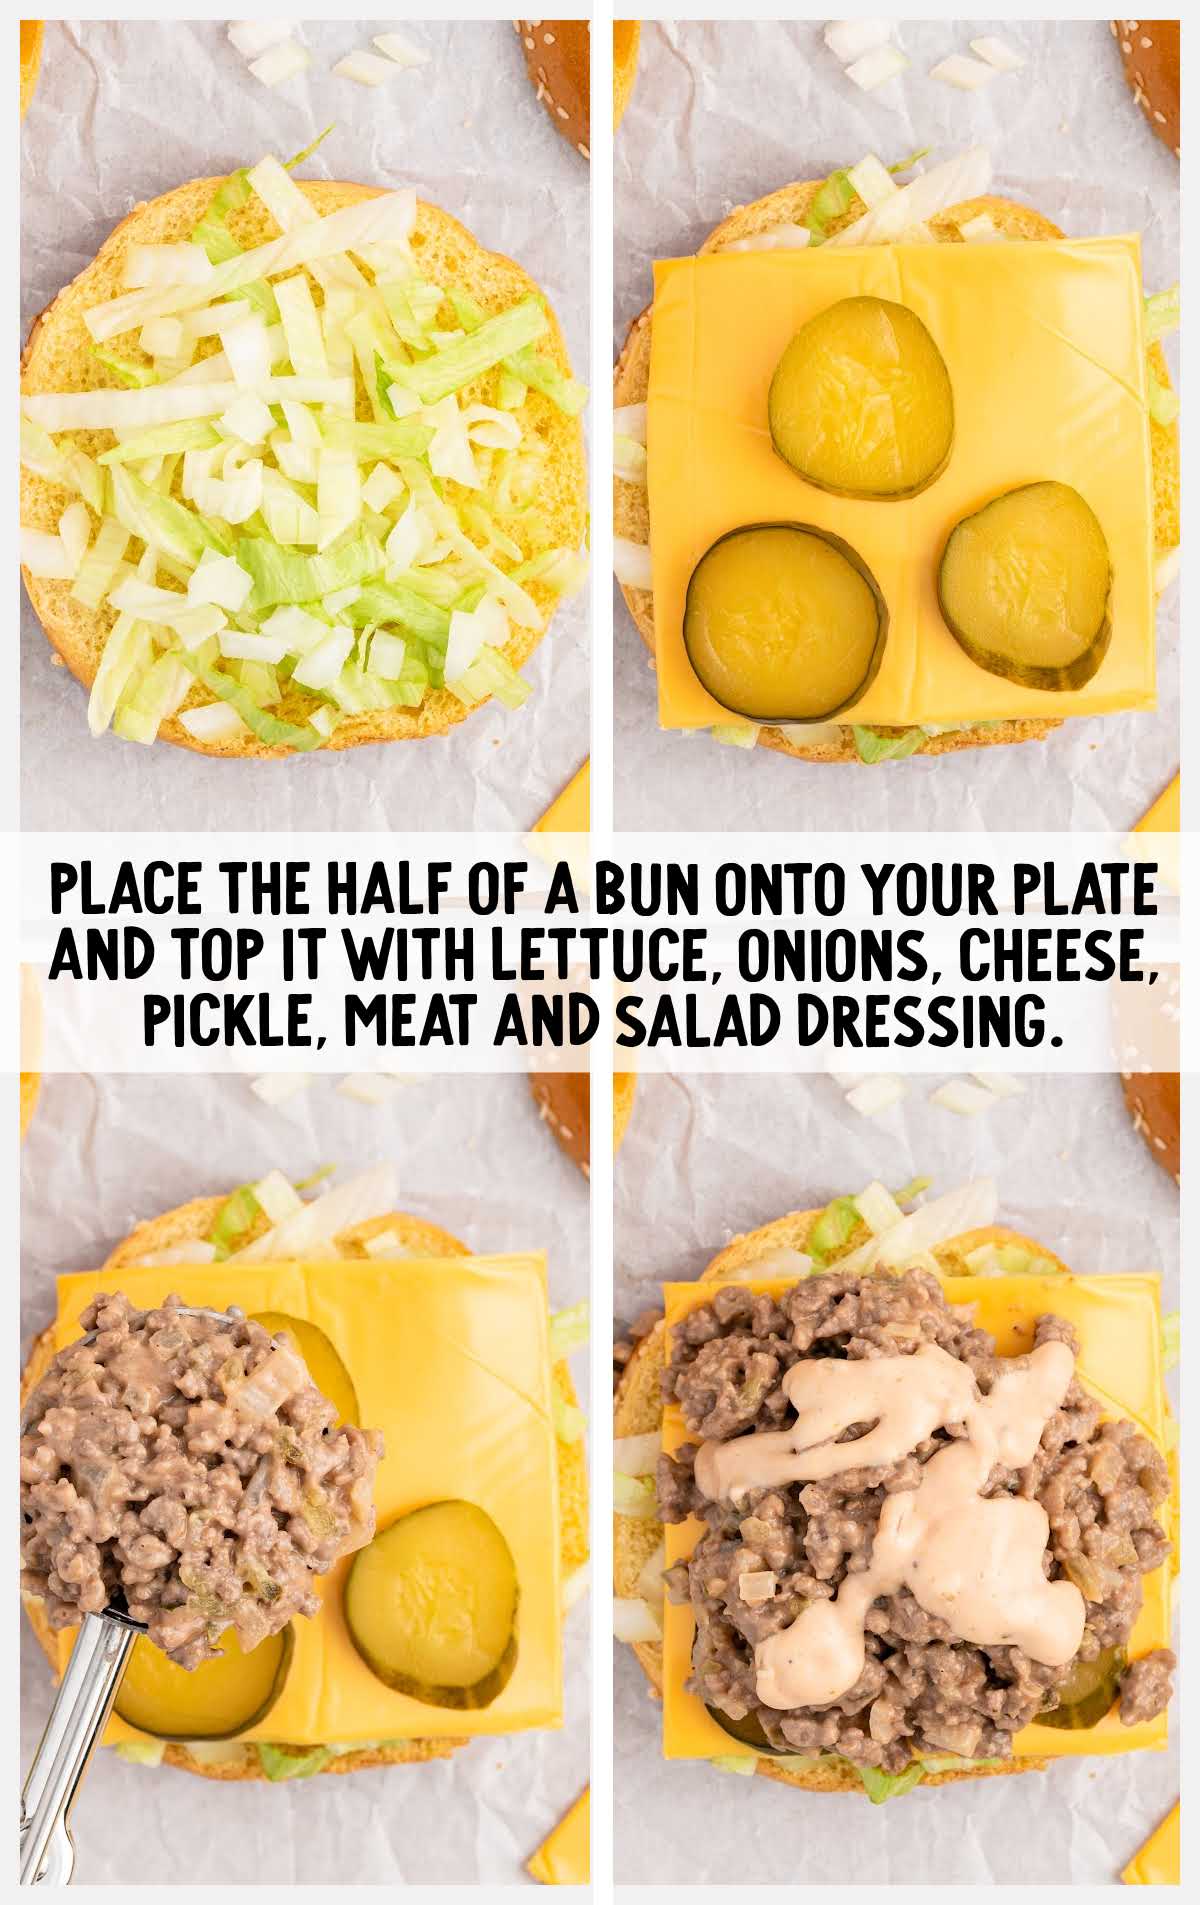 bun topped with with lettuce, yellow onions, American cheese, dill pickles, the meat mixture, Thousand Island dressing, and the top bun